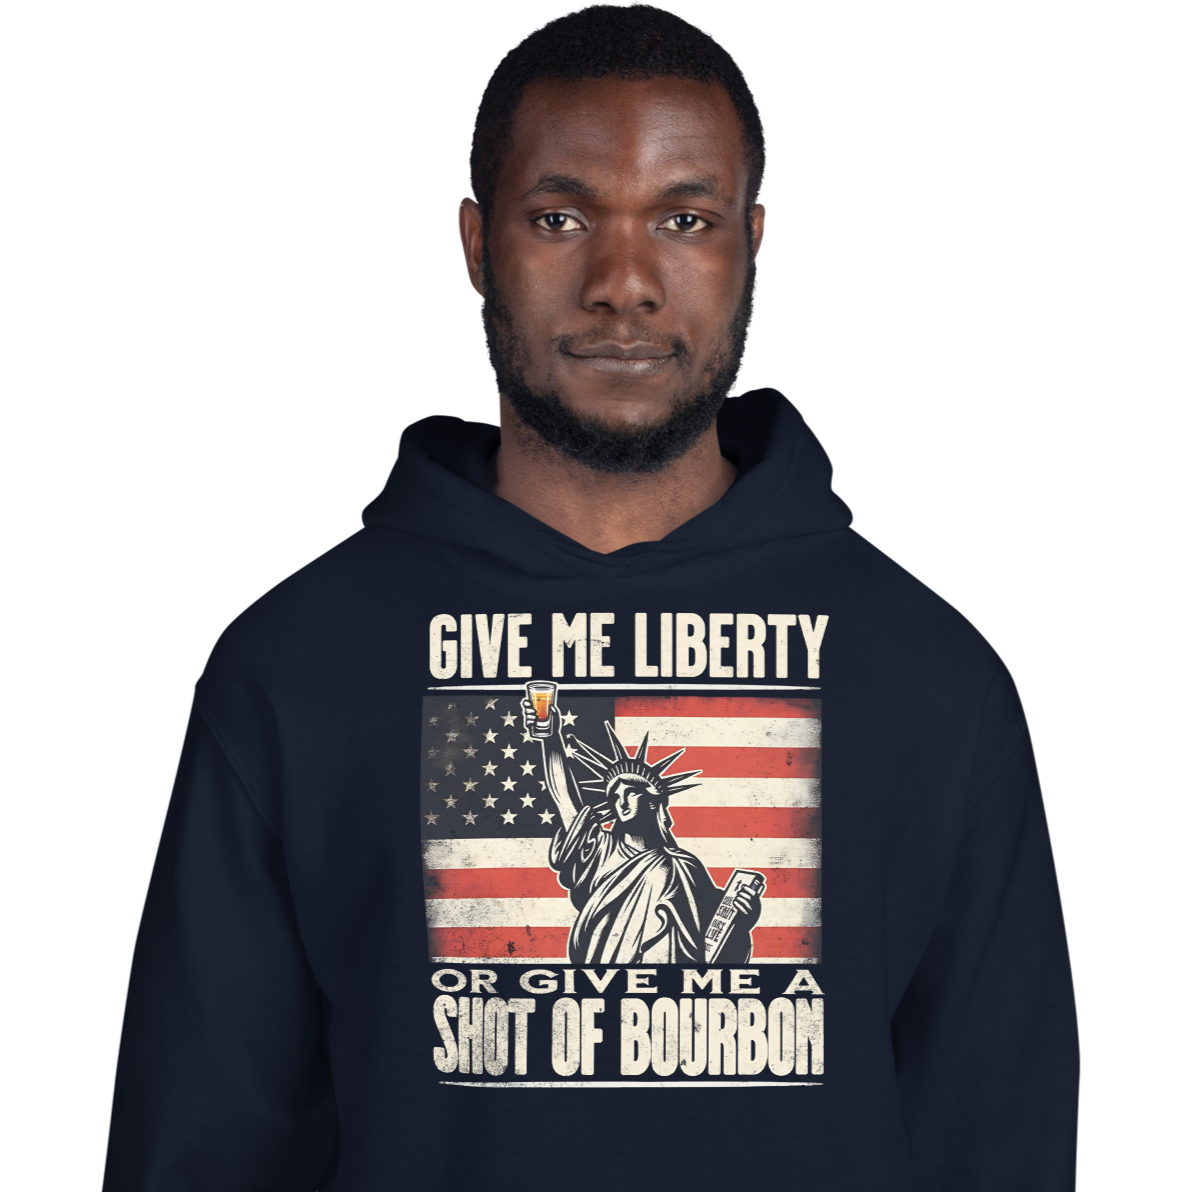 Hoodie with Give Me Liberty or Give Me a Shot of Bourbon text, Statue of Liberty holding a shot glass, and distressed American flag background. Perfect for 4th of July.